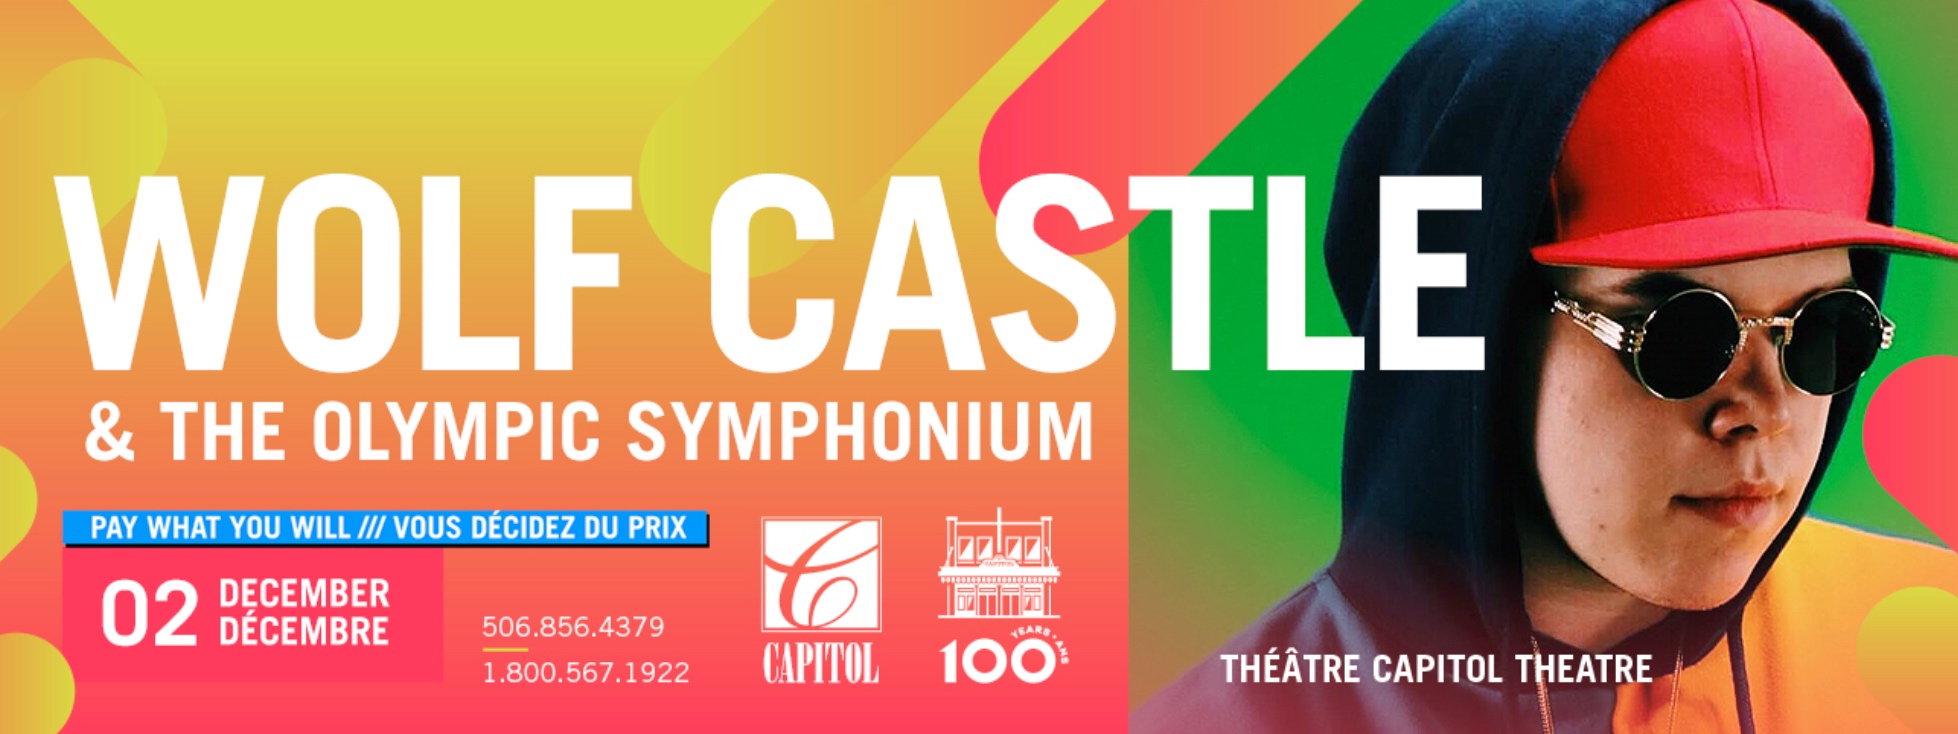 Wolf Castle and the Olympic Symphonium. Pay what you will. December 2, Capitol Theatre